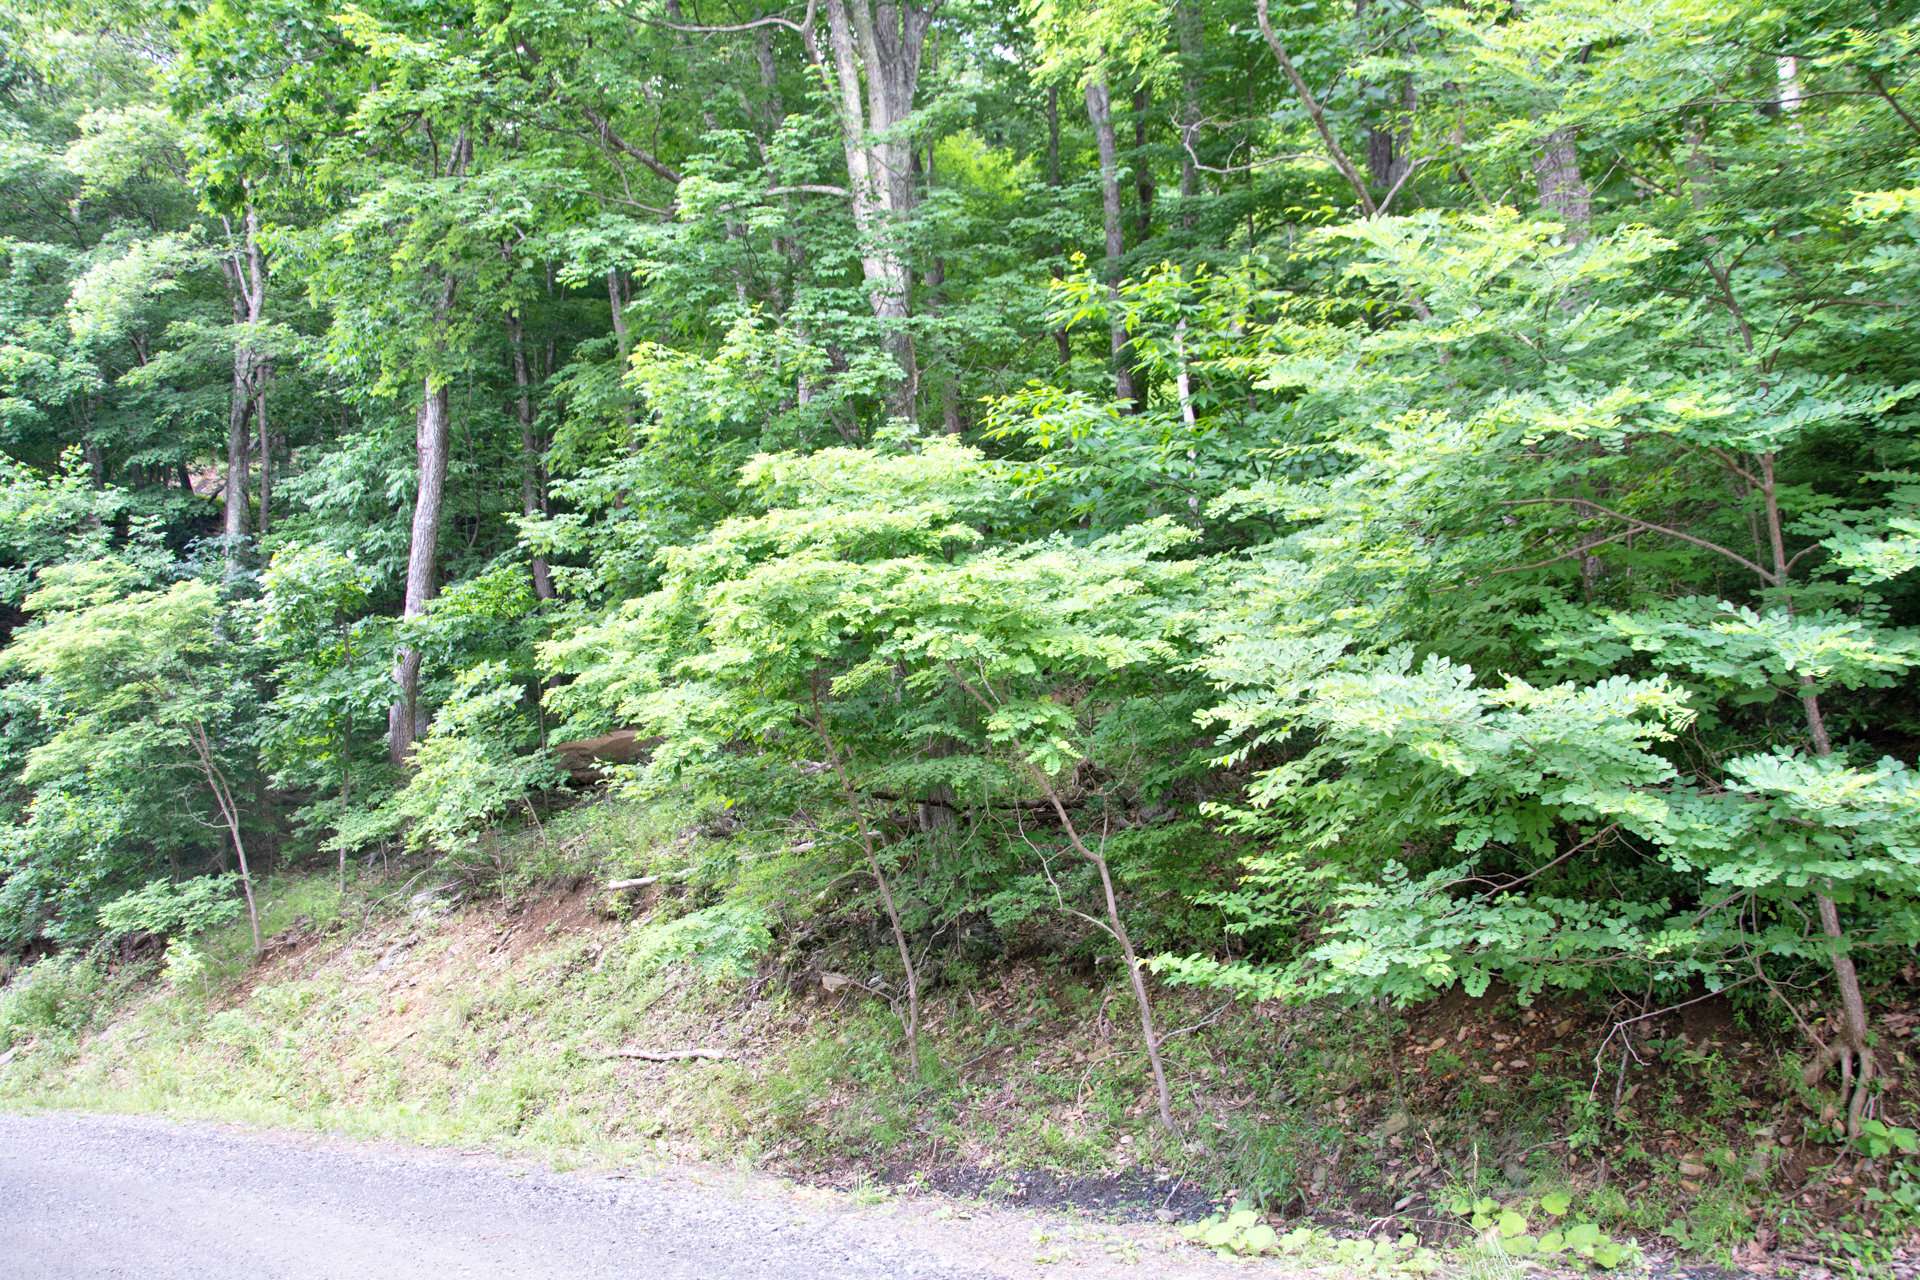 Lot 17 is a 1.67 acre home site with a septic approval for a 2 bedroom home.  This home site is offered at $60,000